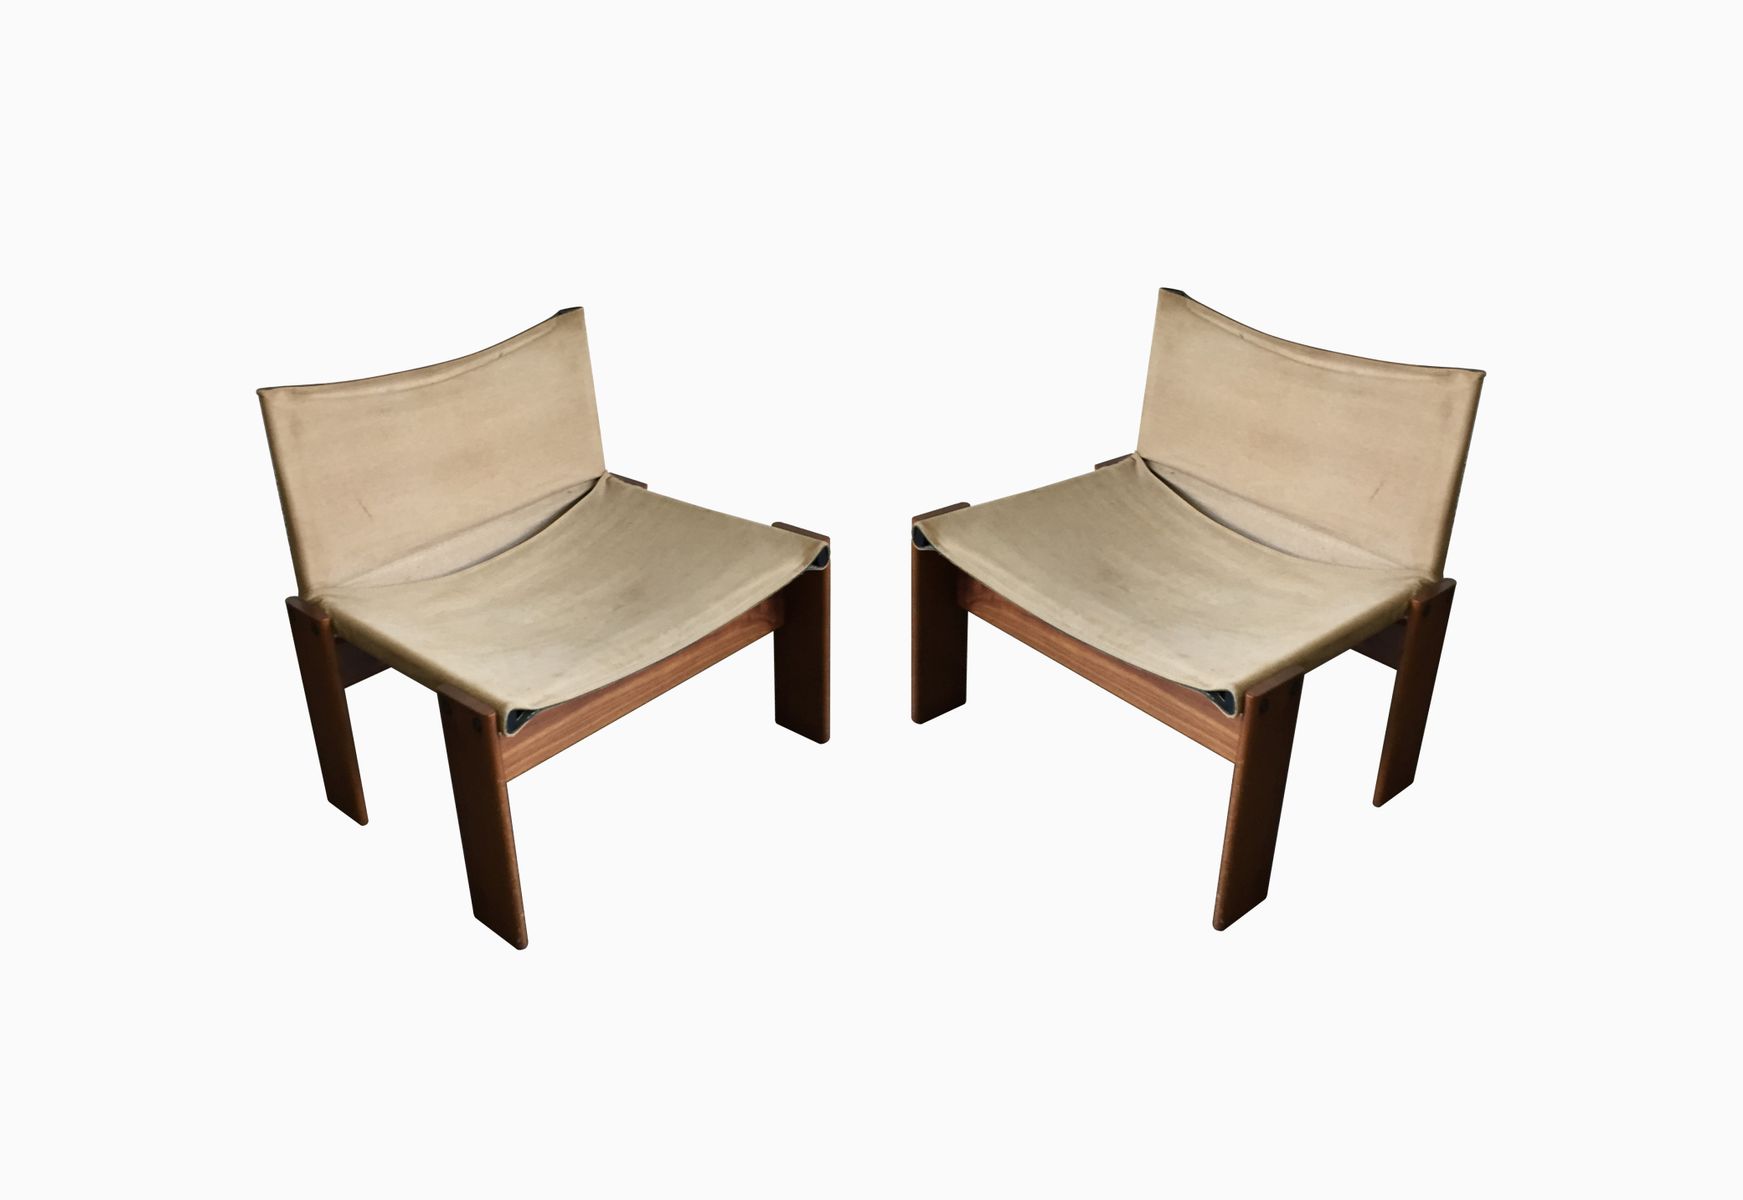 Vintage Lounge Chairs, Set of 2 for sale at Pamono